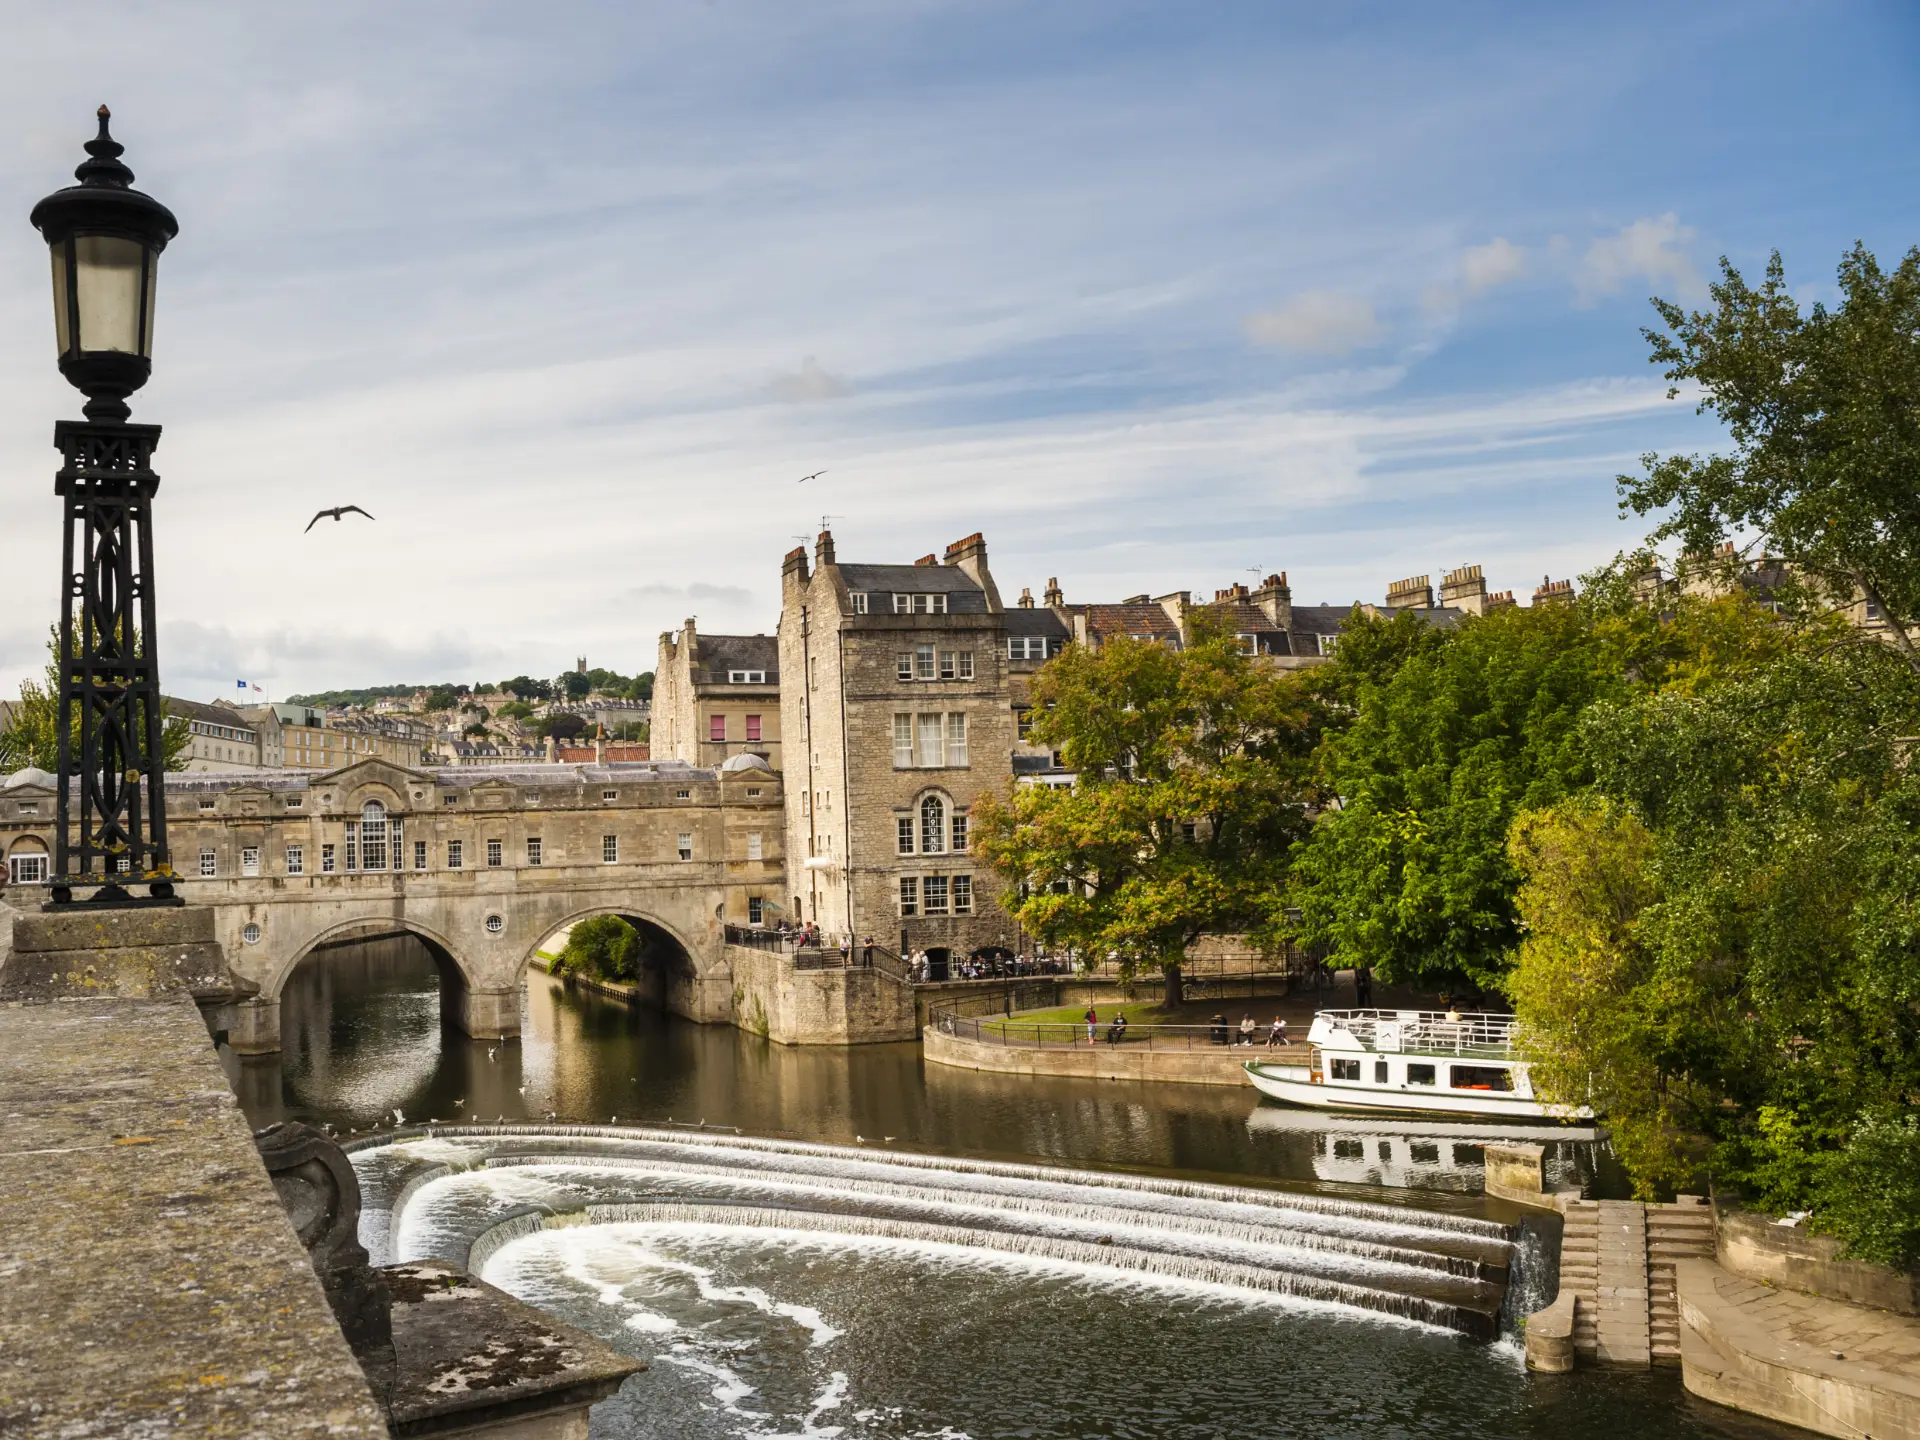 Historic pulteney bridge over the river avon in bath, england, with a beautiful cascading weir, a boat, and classic georgian architecture under a cloudy sky.